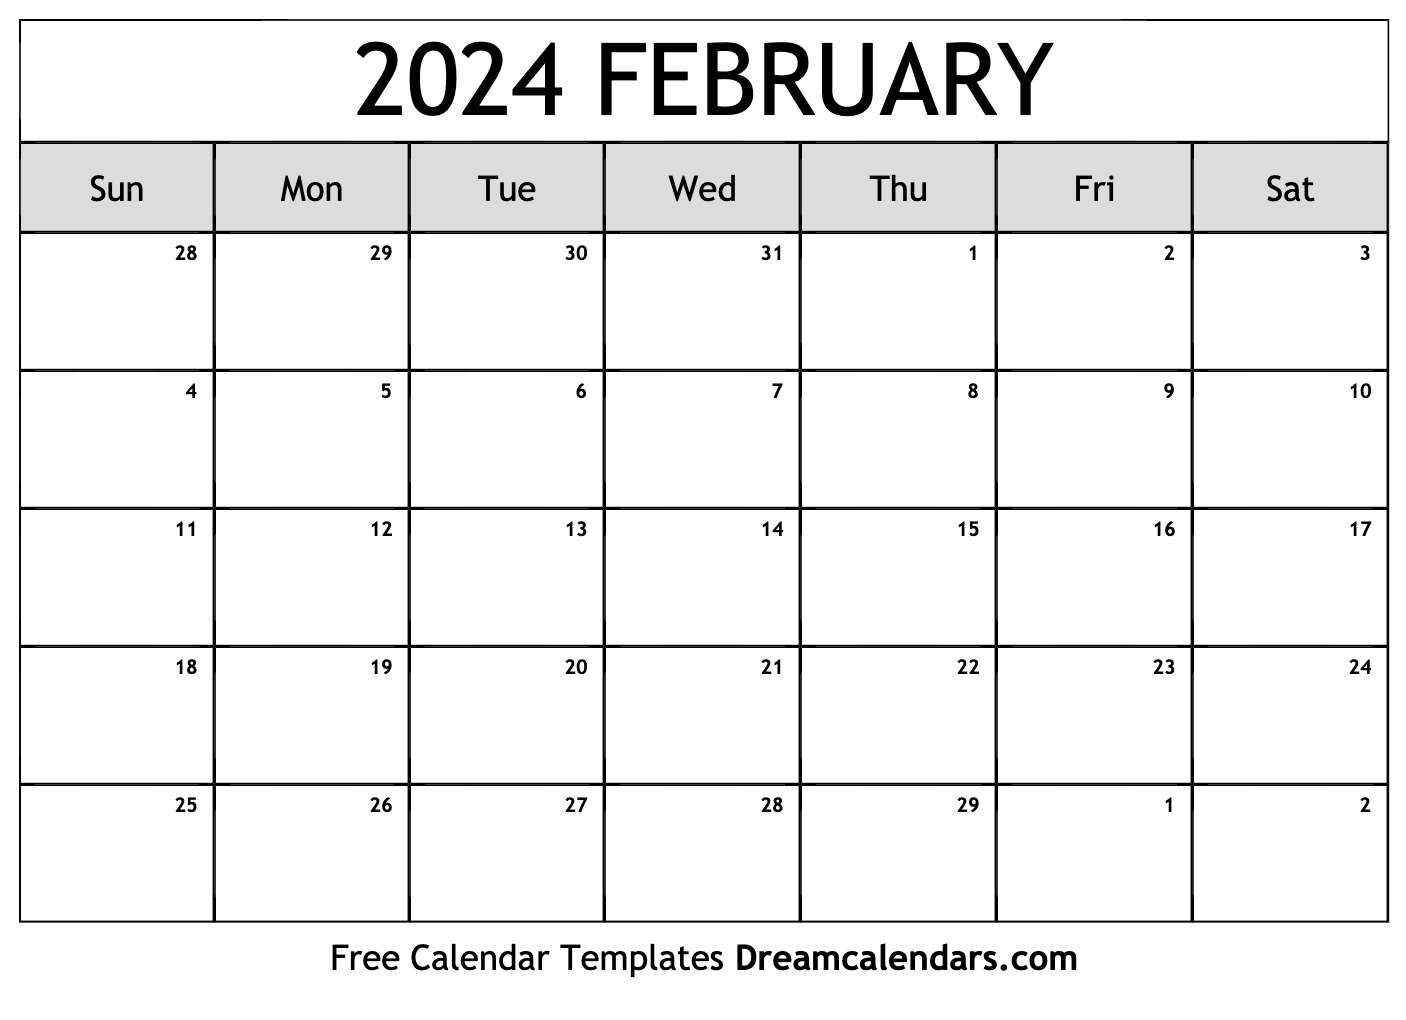 February All Days Name 2024 Latest Ultimate Popular Famous Lunar